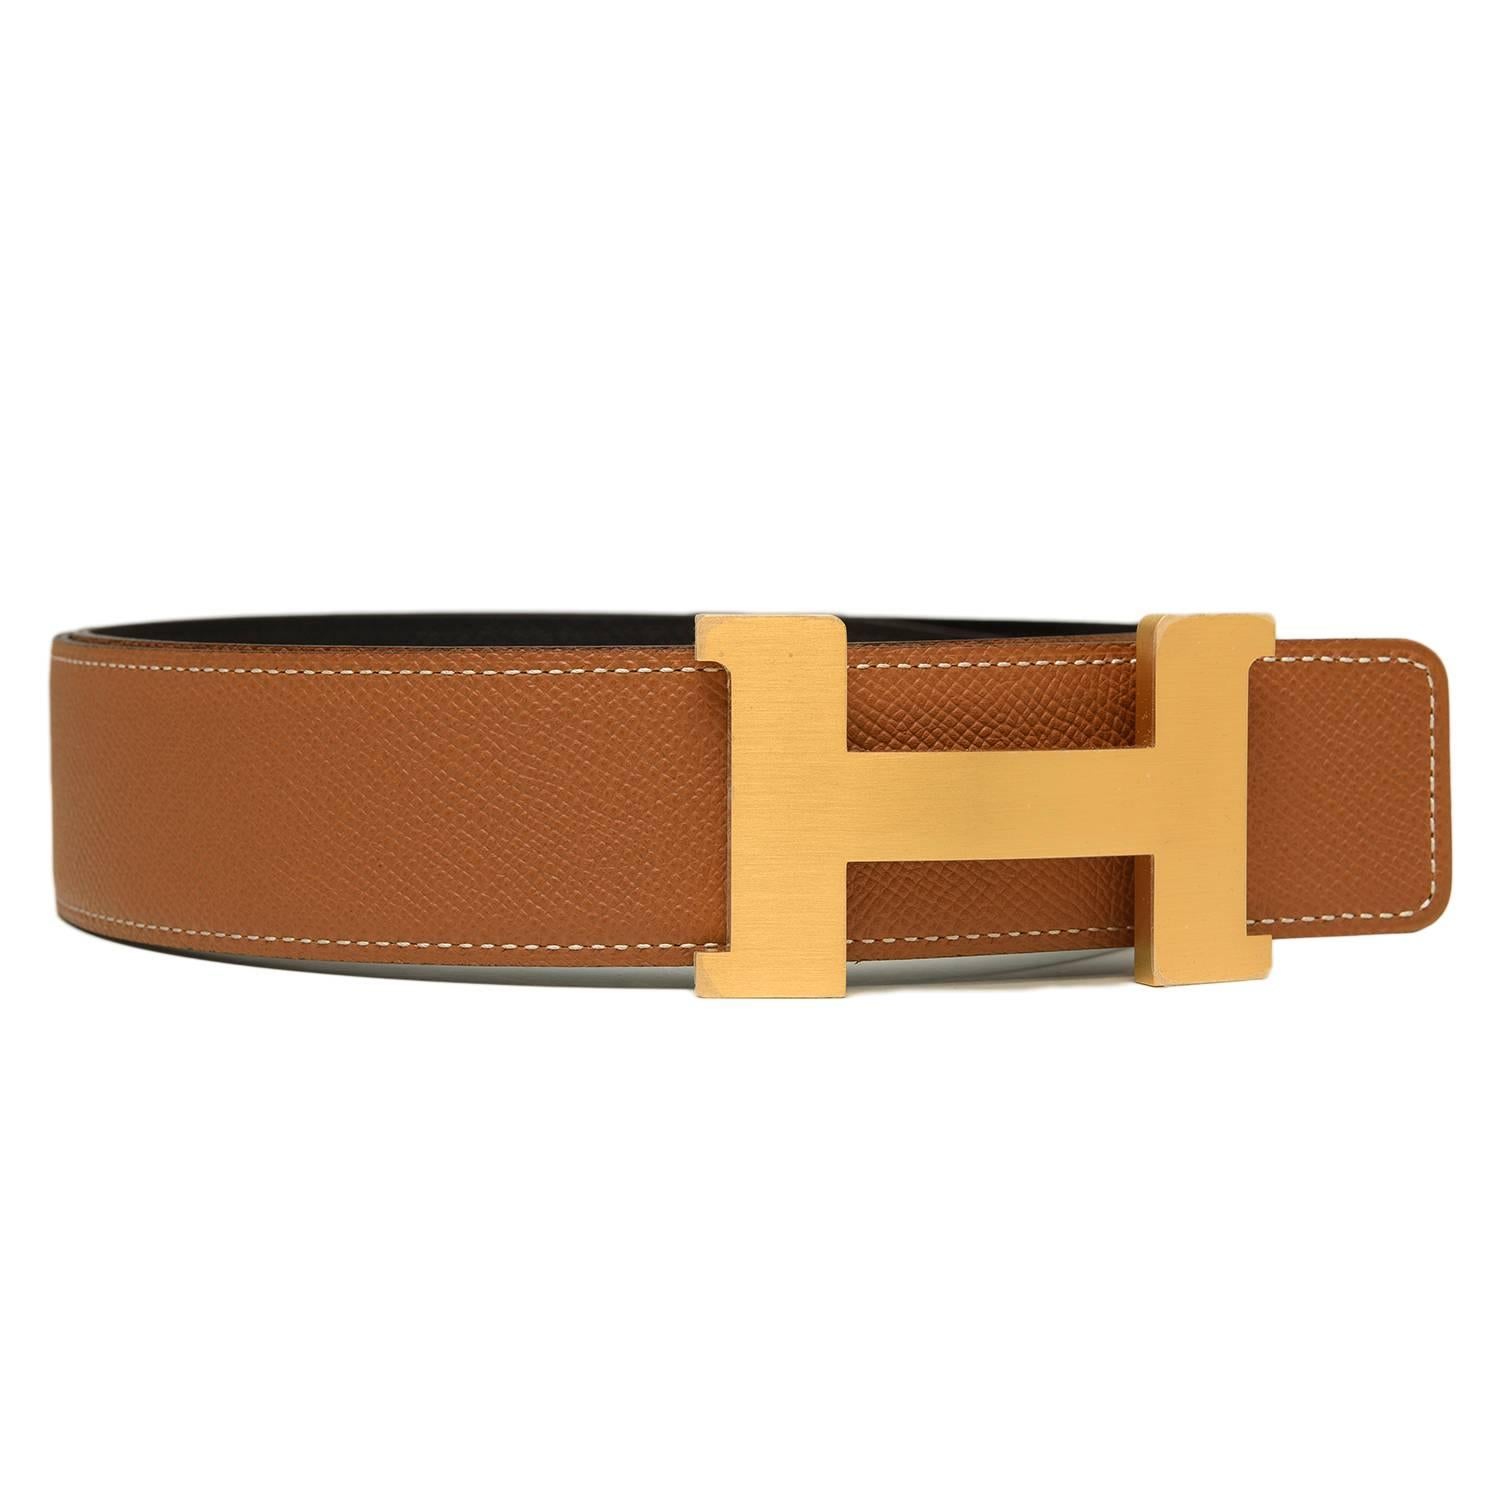 Hermes belt kit comprising an adjustable wide 42mm Constance H belt of Black epsom with tonal stitching reversing to Gold epsom with white contrast stitching accompanied by a removable brushed gold H buckle.

Origin: France
 
Condition: Pristine,